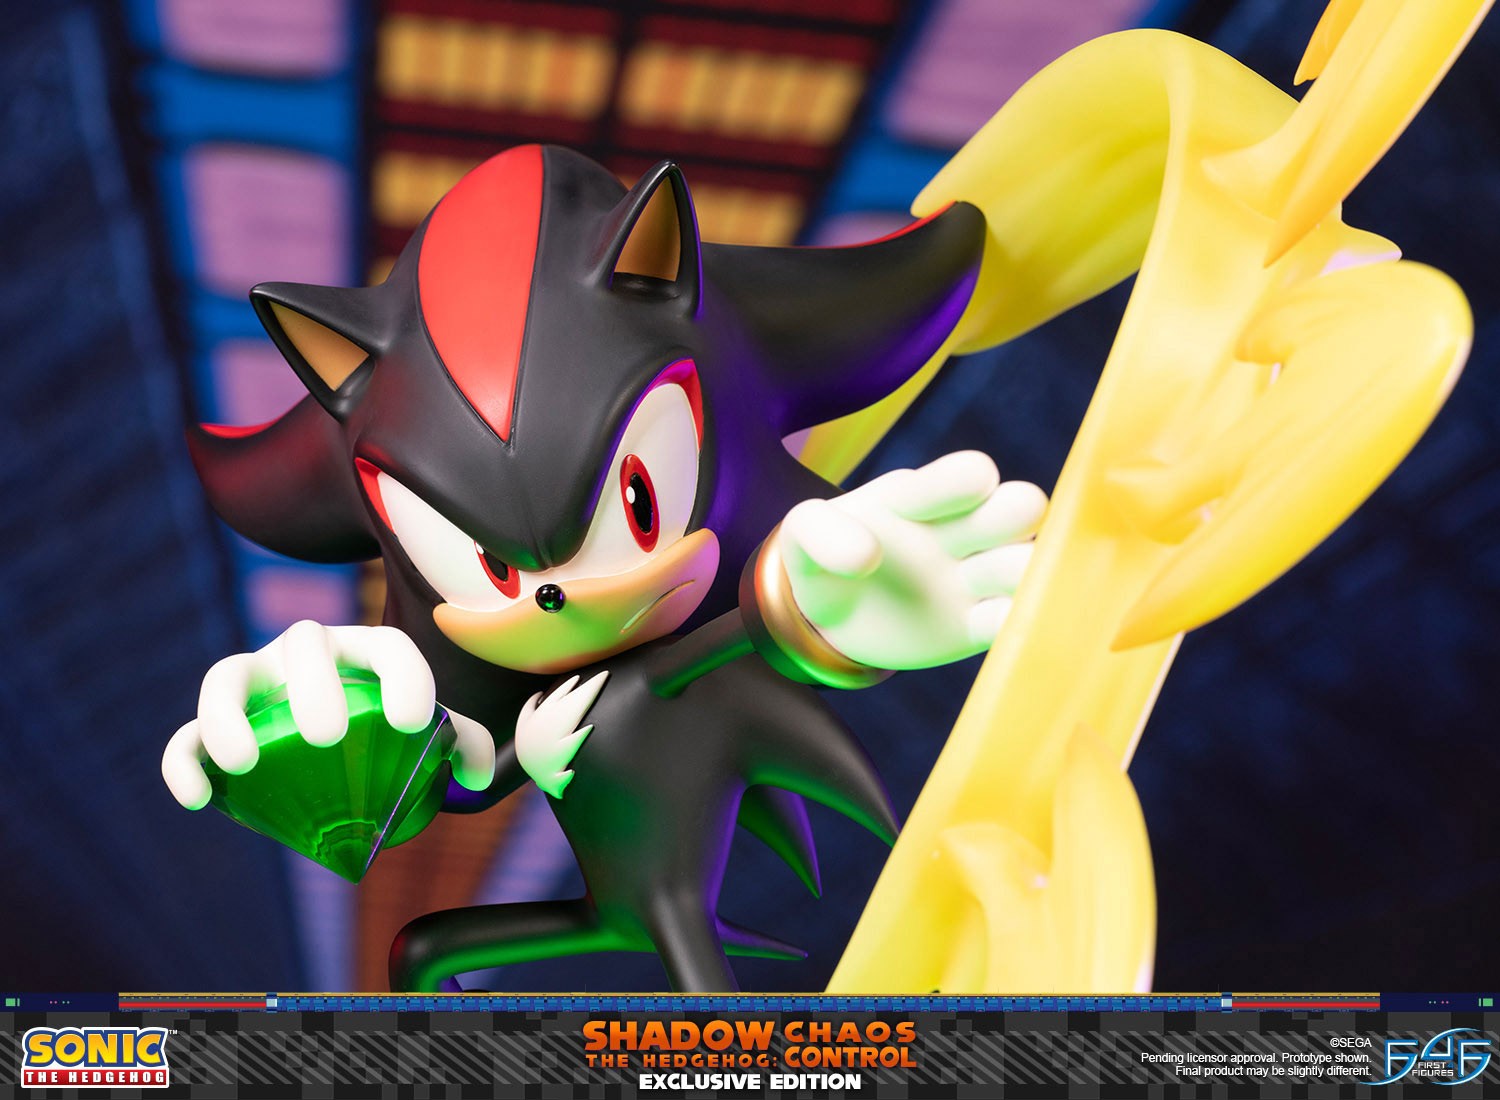 Sonic's Ultimate Form - ChaosWarProductions ltd.